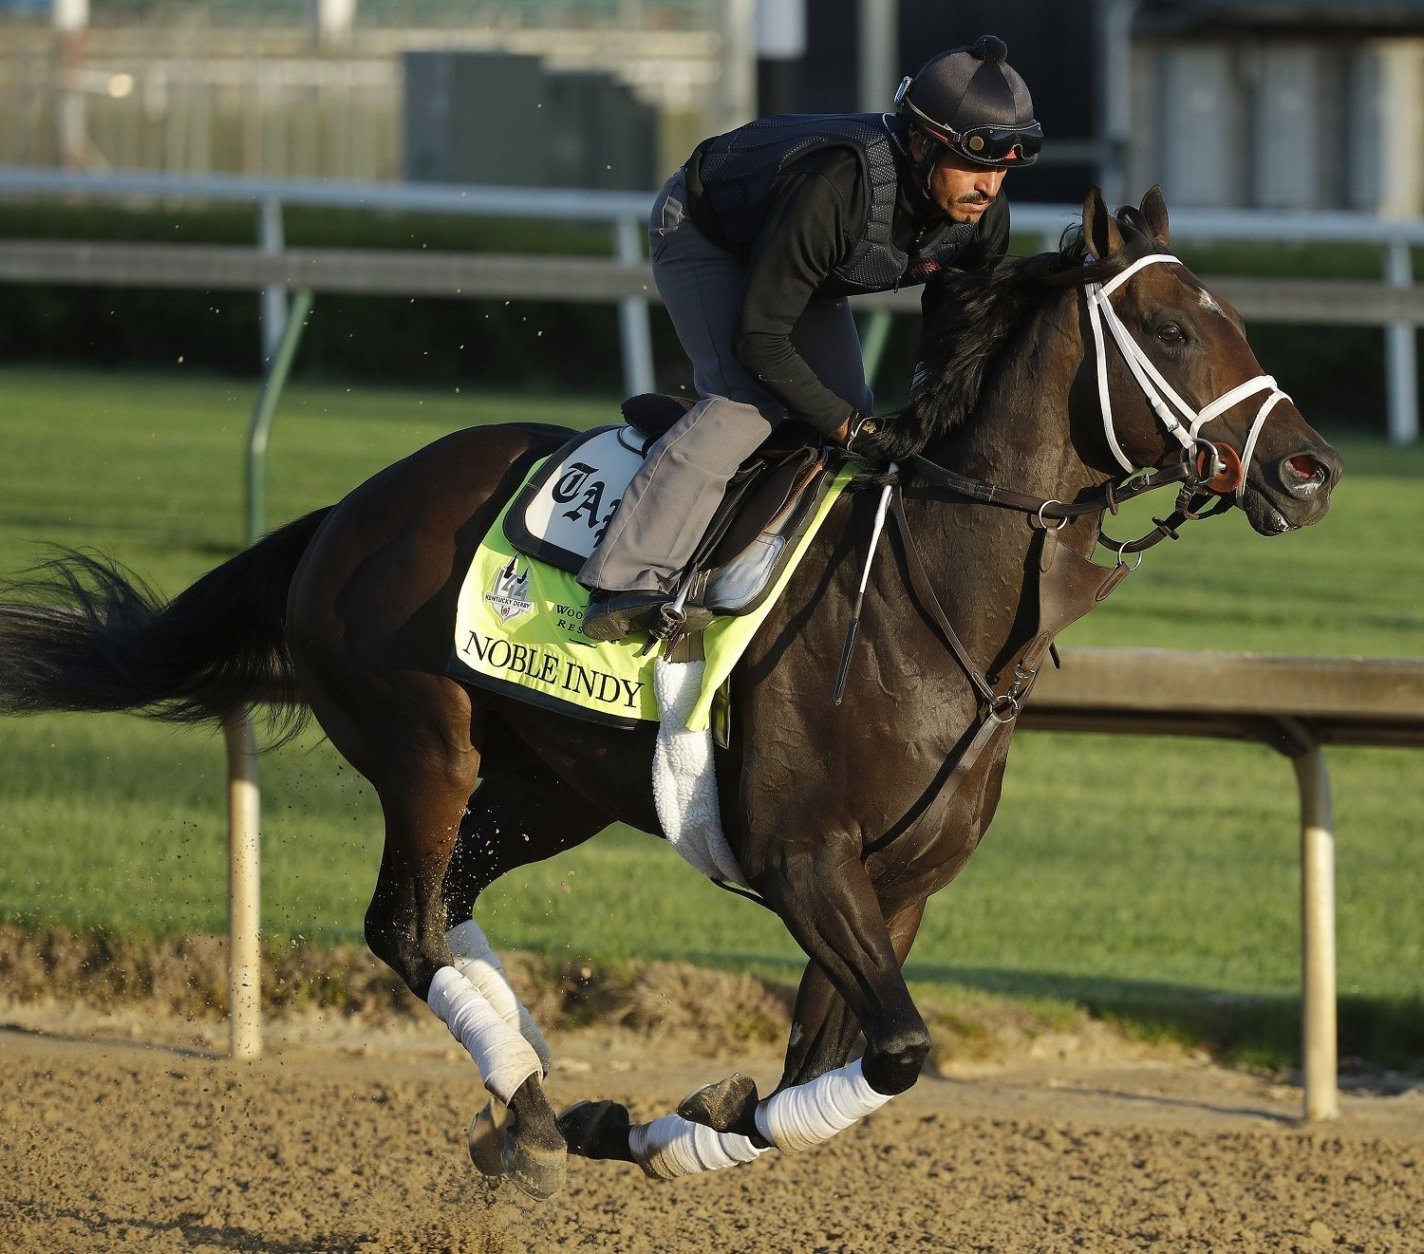 Kentucky Derby hopeful Noble Indy runs during a morning workout at Churchill Downs Tuesday, May 1, 2018, in Louisville, Ky. The 144th running of the Kentucky Derby is scheduled for Saturday, May 5. (AP Photo/Charlie Riedel)